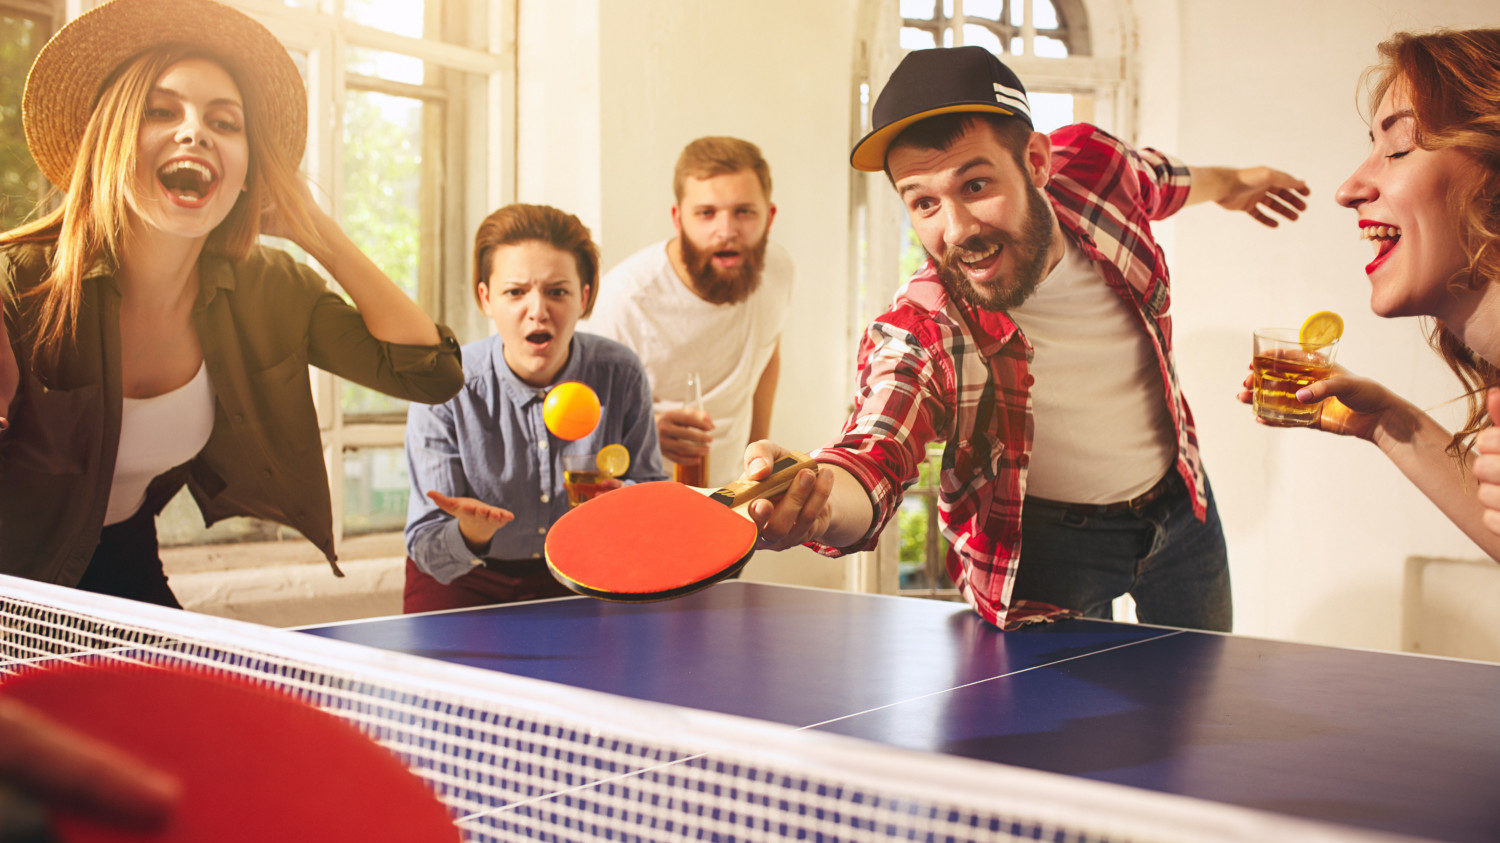 People playing table tennis